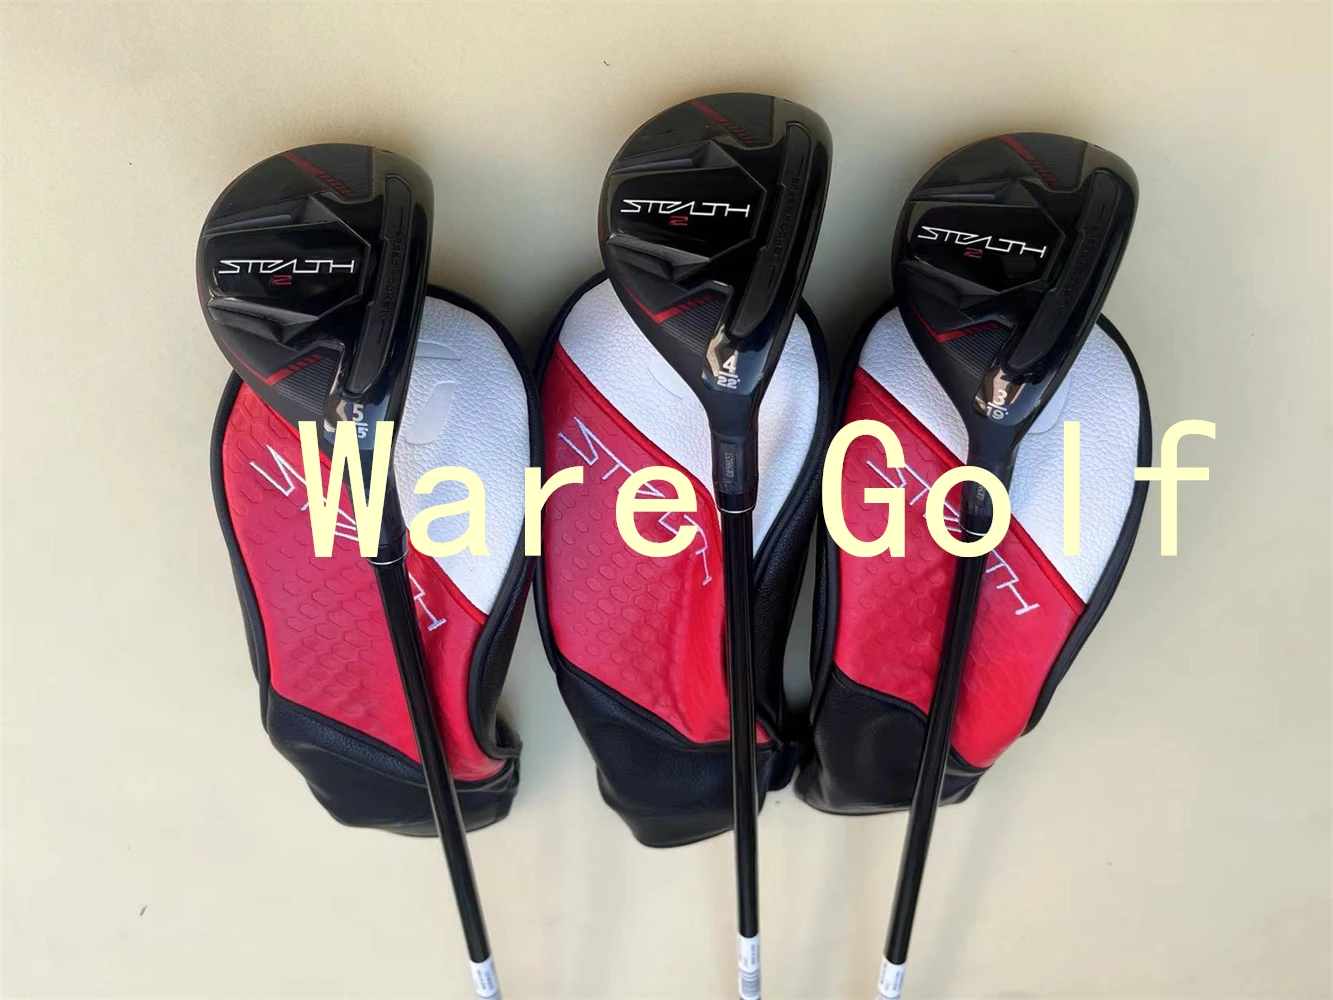 

Completely New Arrival Stealth 2 Golf Clubs Hybrids 19/22/25 Loft Degree R/S Graphite Shafts Headcovers Fast Global Shipping